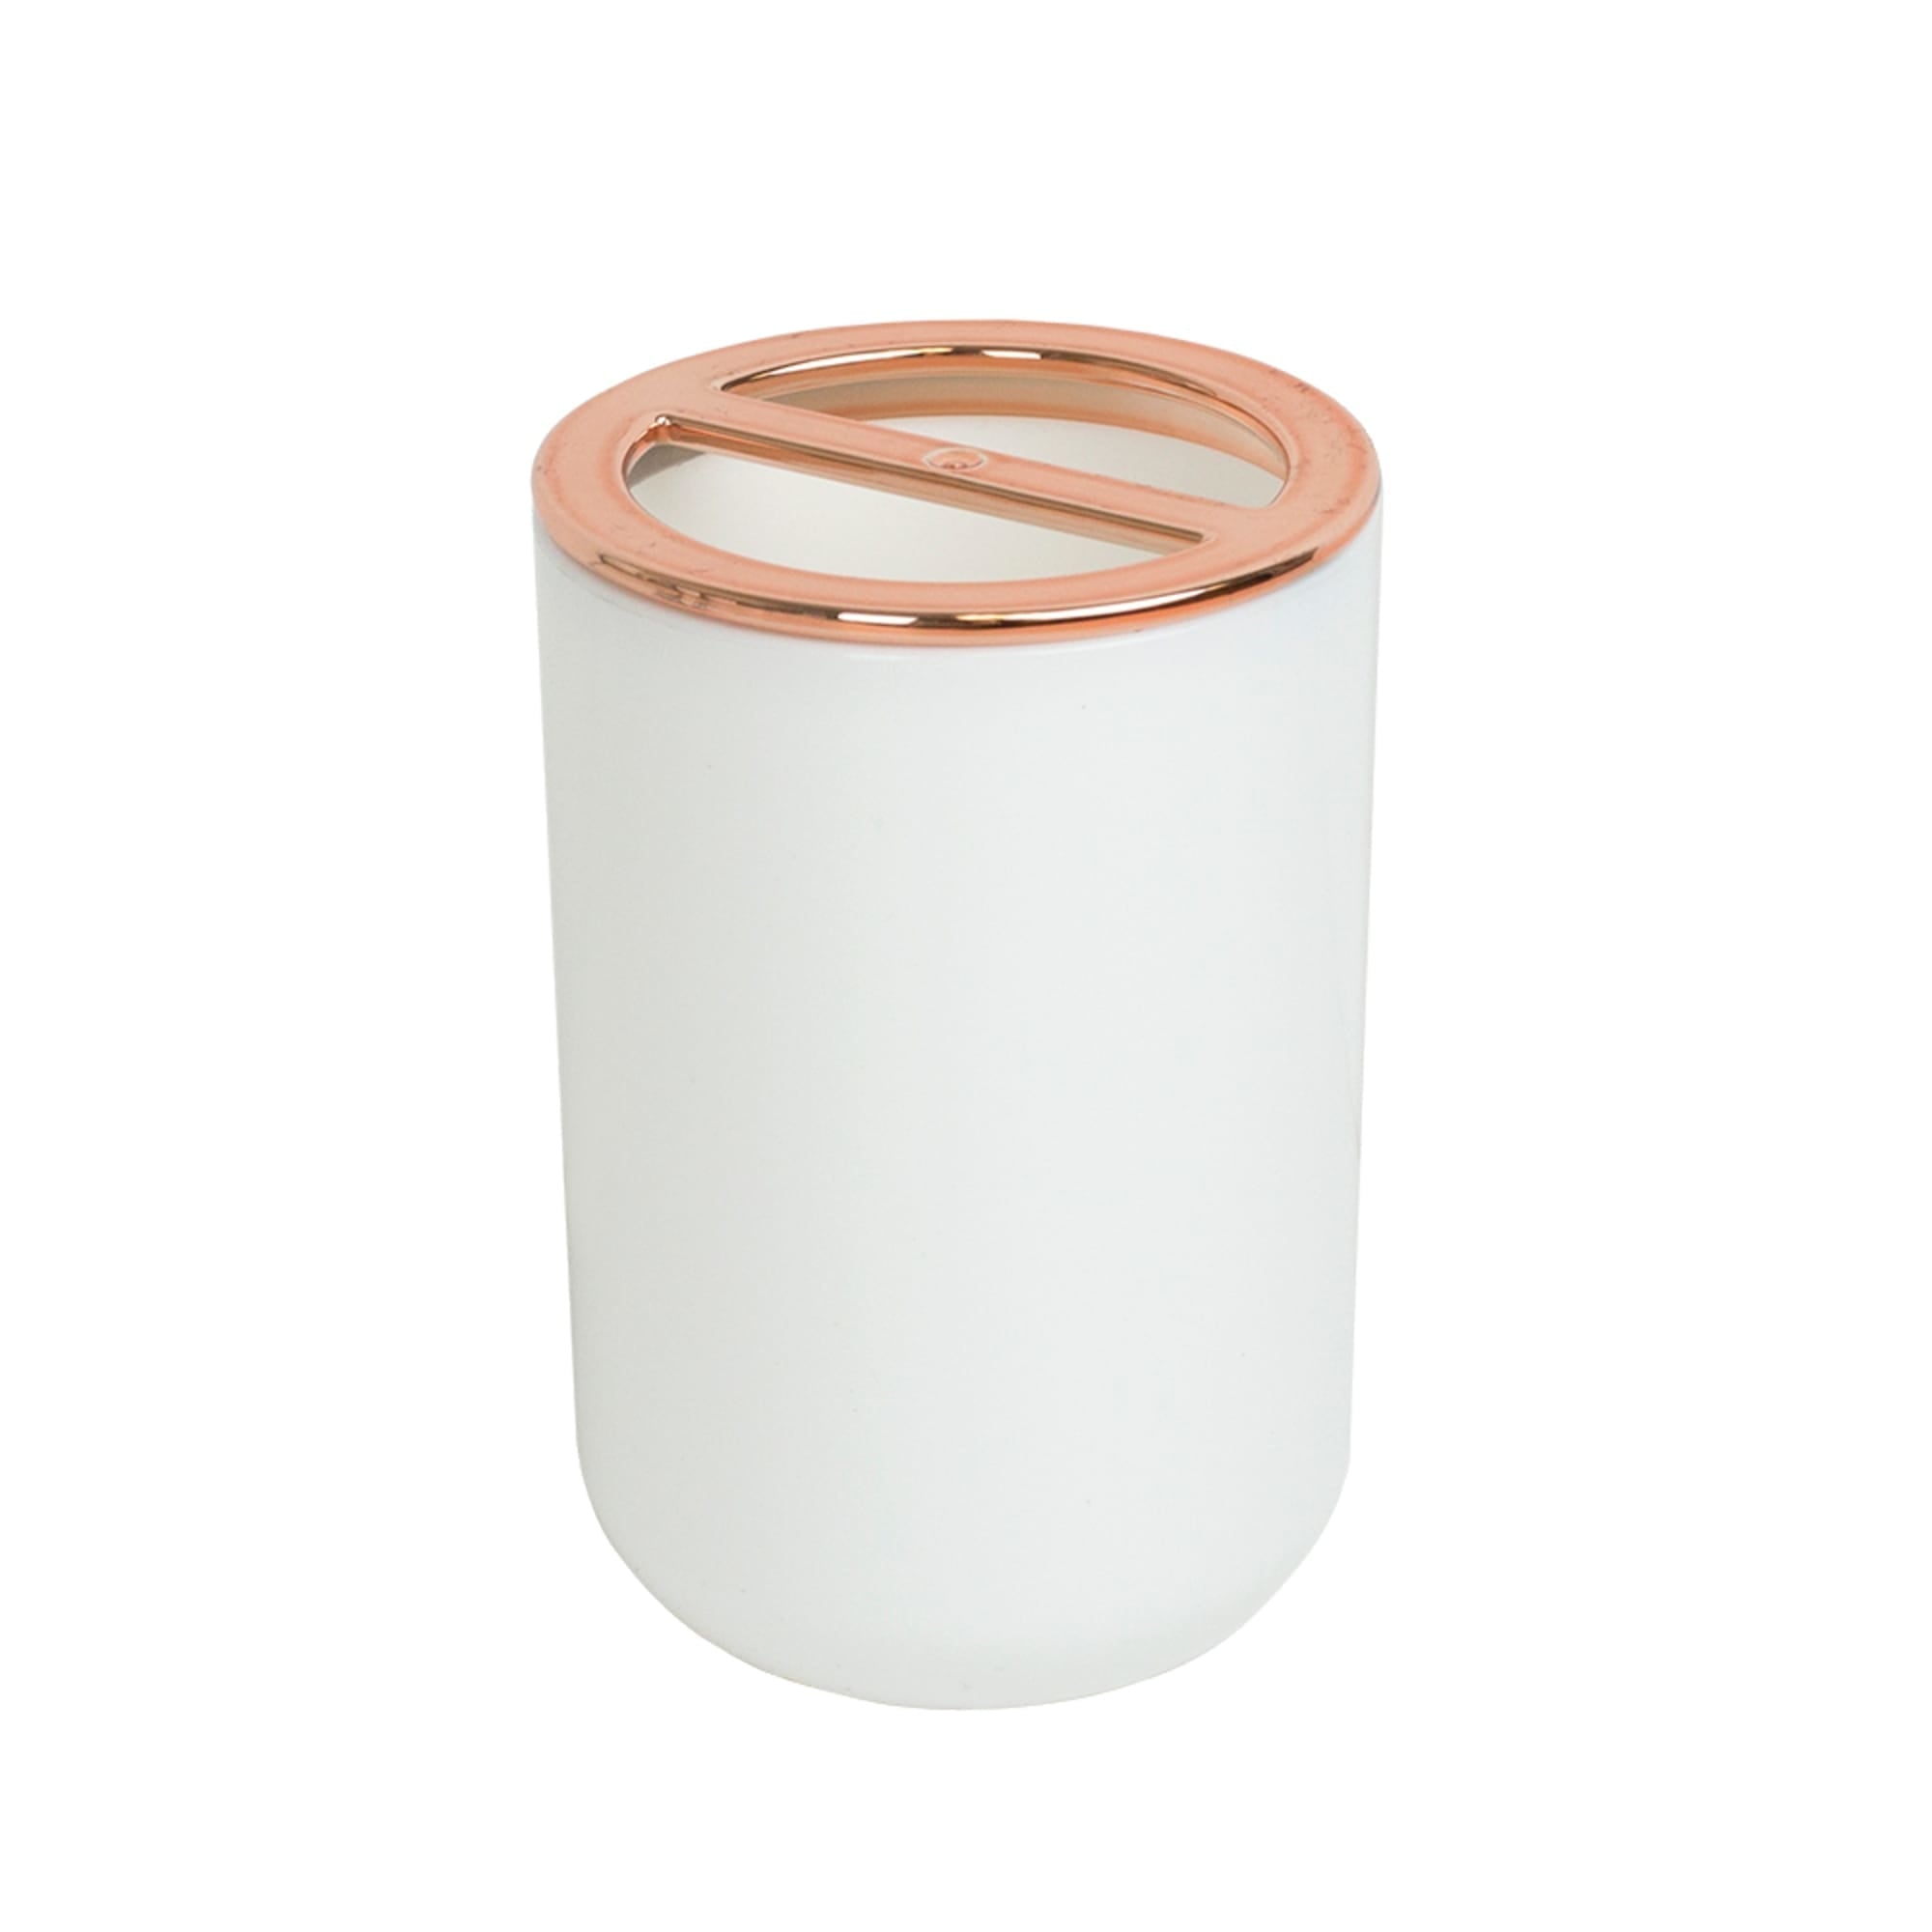 Home Basics 4 Piece Ceramic Bath Accessory Set with Rose Gold Accents, White $15.00 EACH, CASE PACK OF 12